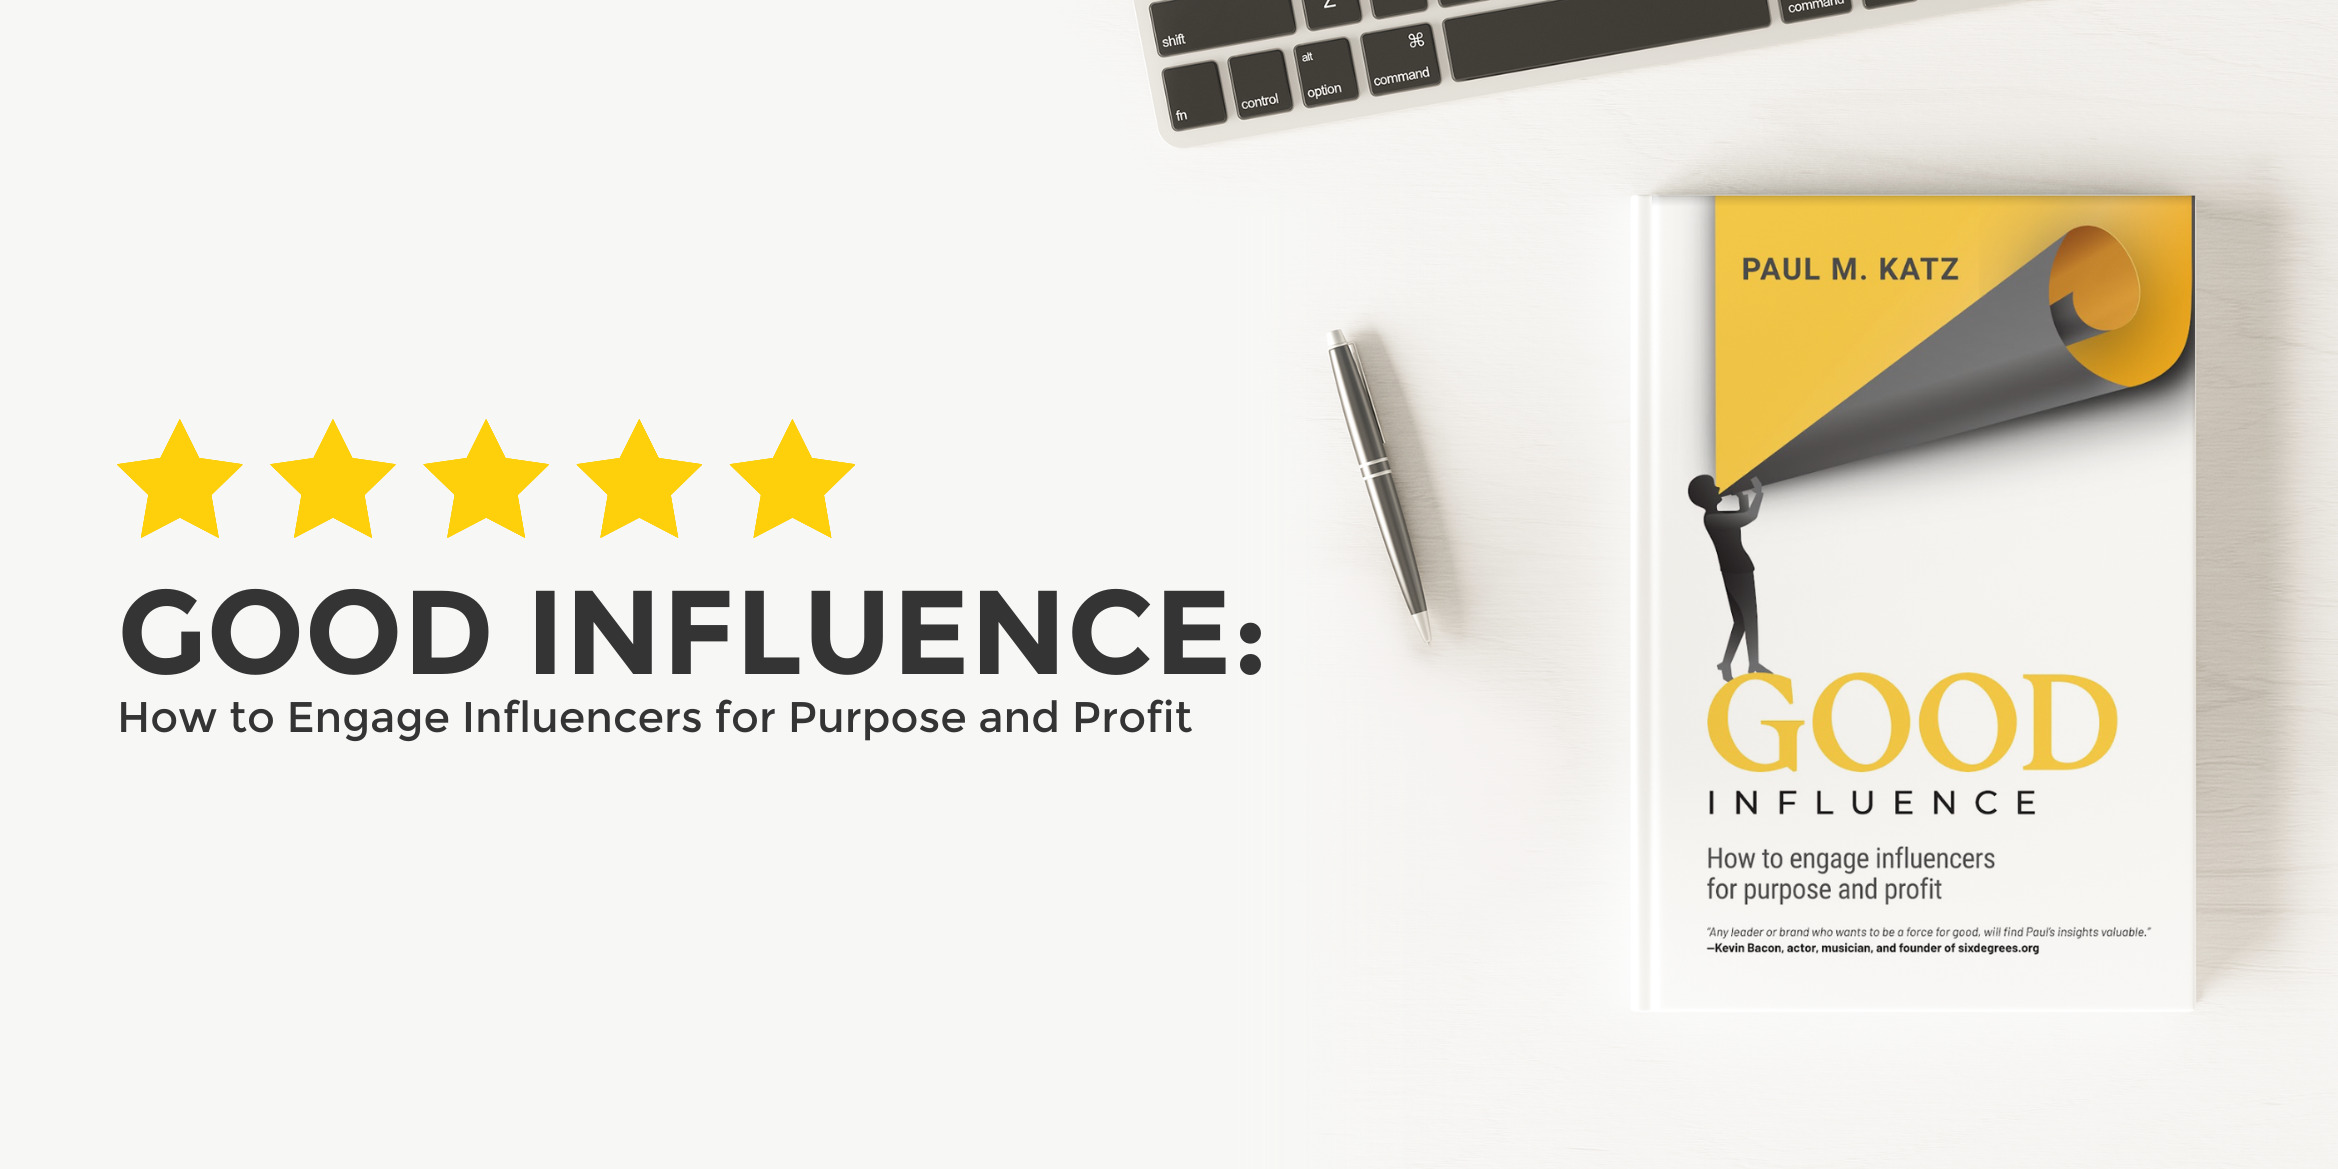 In His New Book, Cultural Change Agent Paul M. Katz Shows How Any Organization or Non-Profit Can Engage Influencers to Create Programs that Raise Awareness, Inspire Action, and Do Good